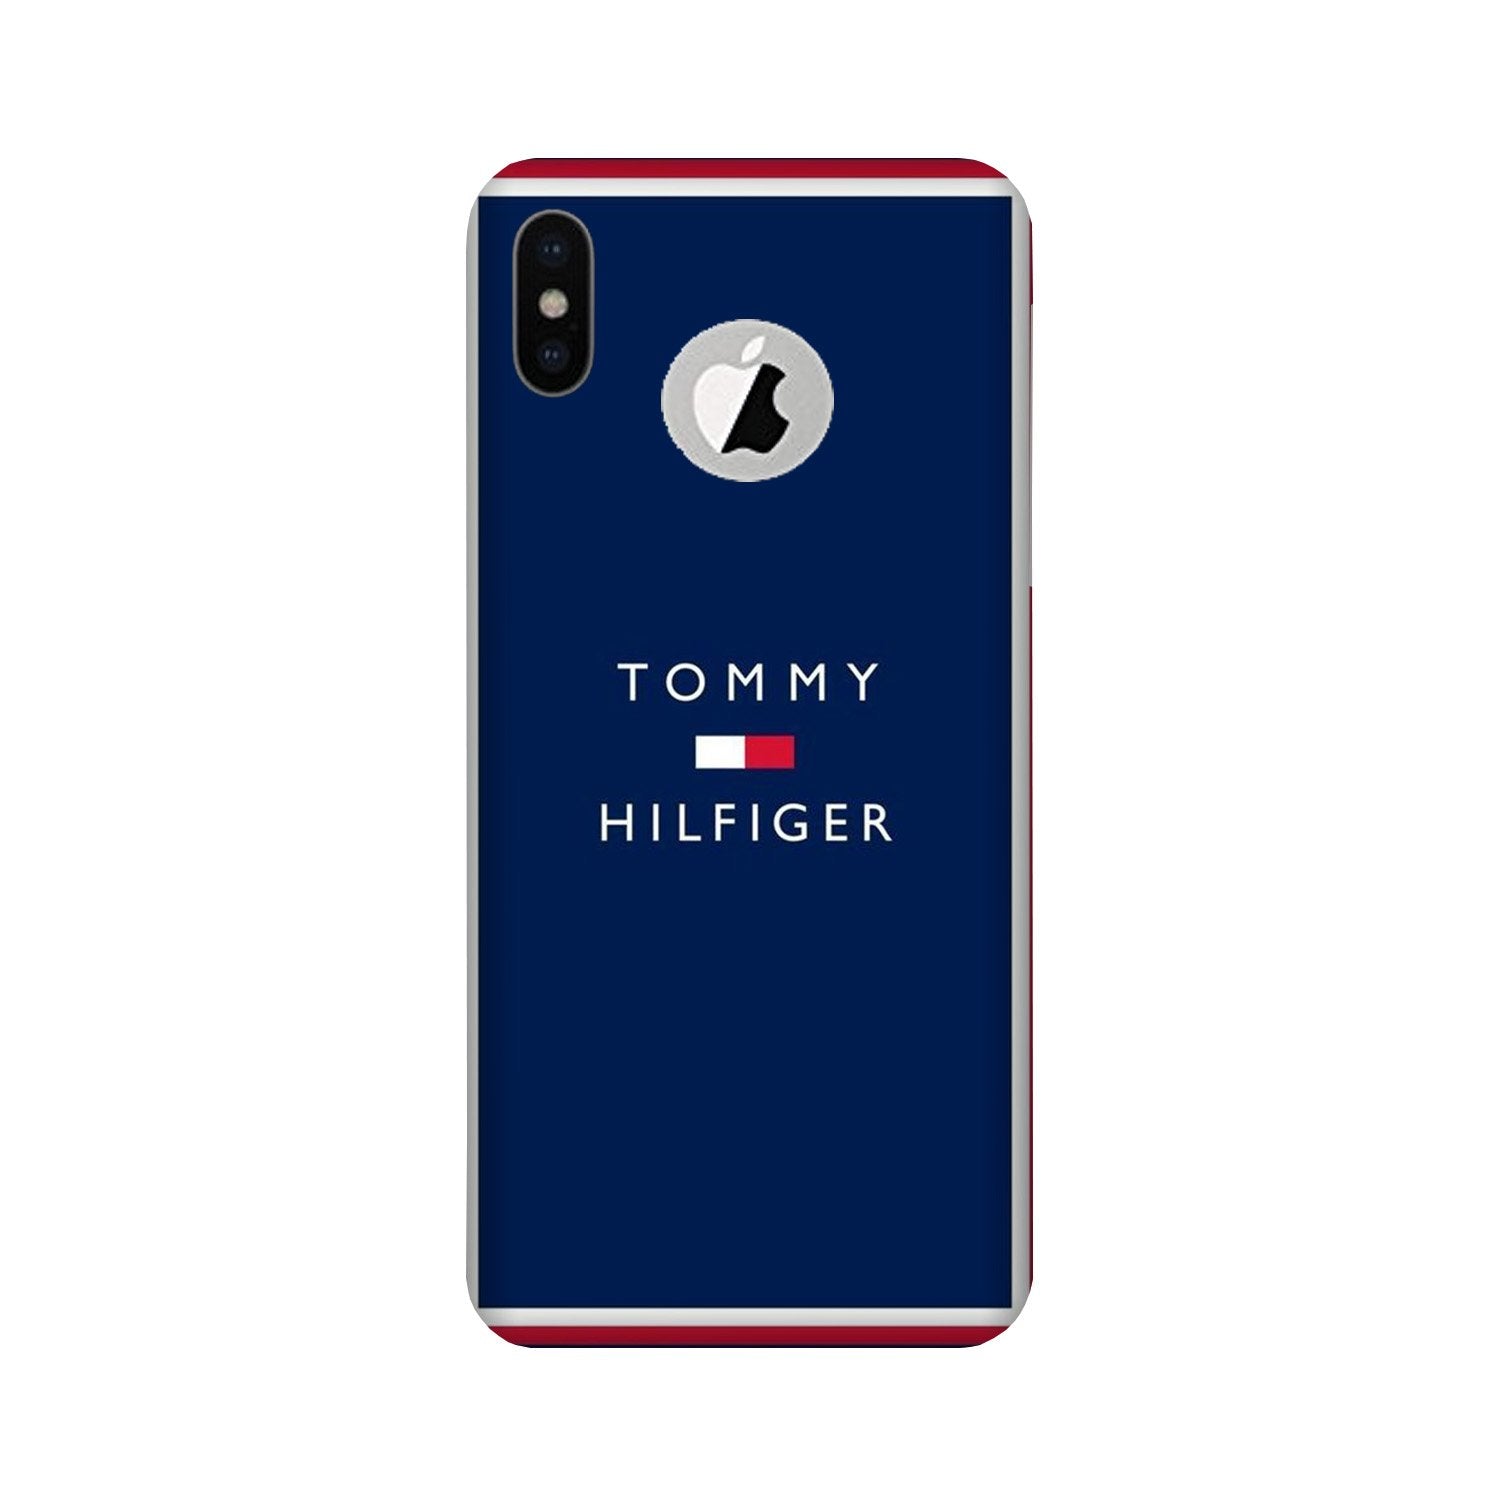 Tommy Hilfiger Case for iPhone Xs logo cut(Design No. 275)